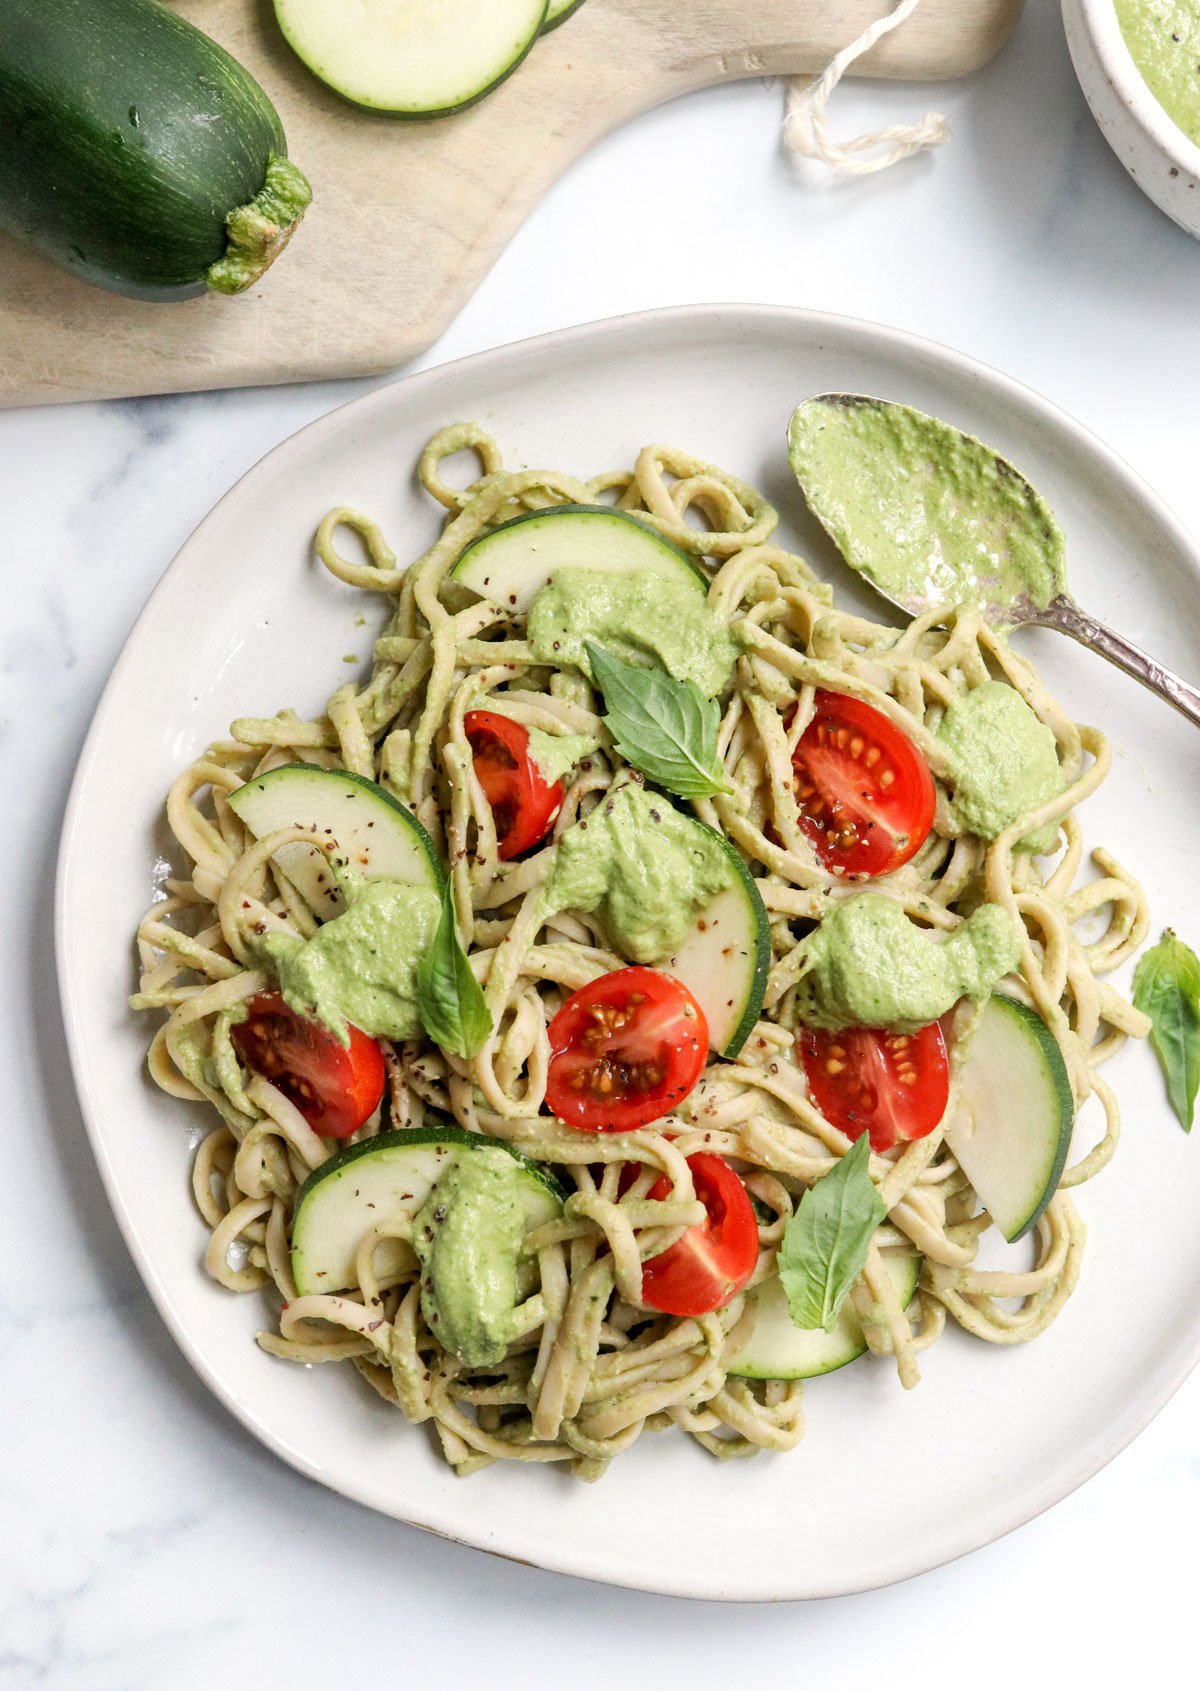 zucchini pesto served on pasta with sliced cherry tomatoes.